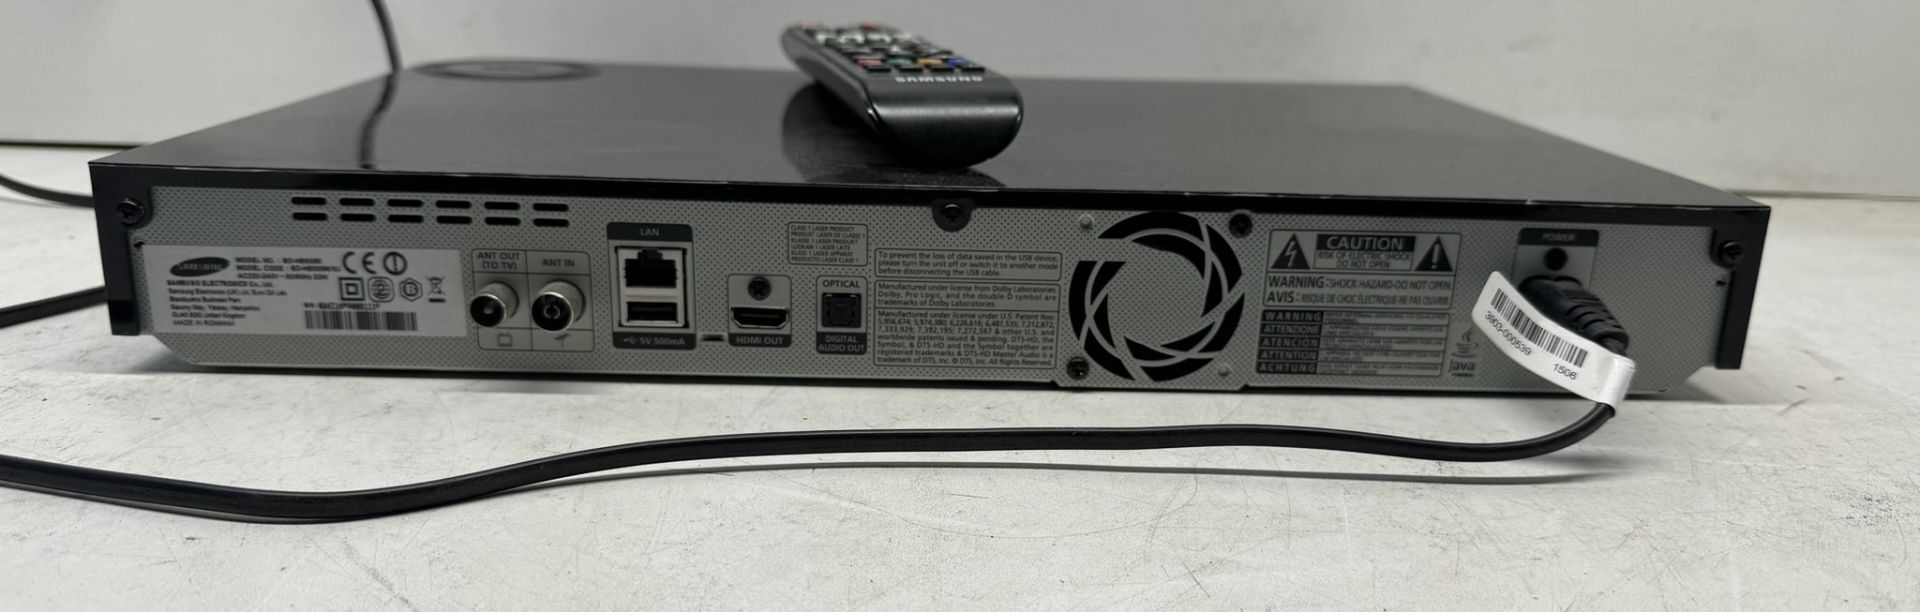 Samsung BD-H8500M 3D Smart Blu-Ray Disc Player - Image 3 of 4